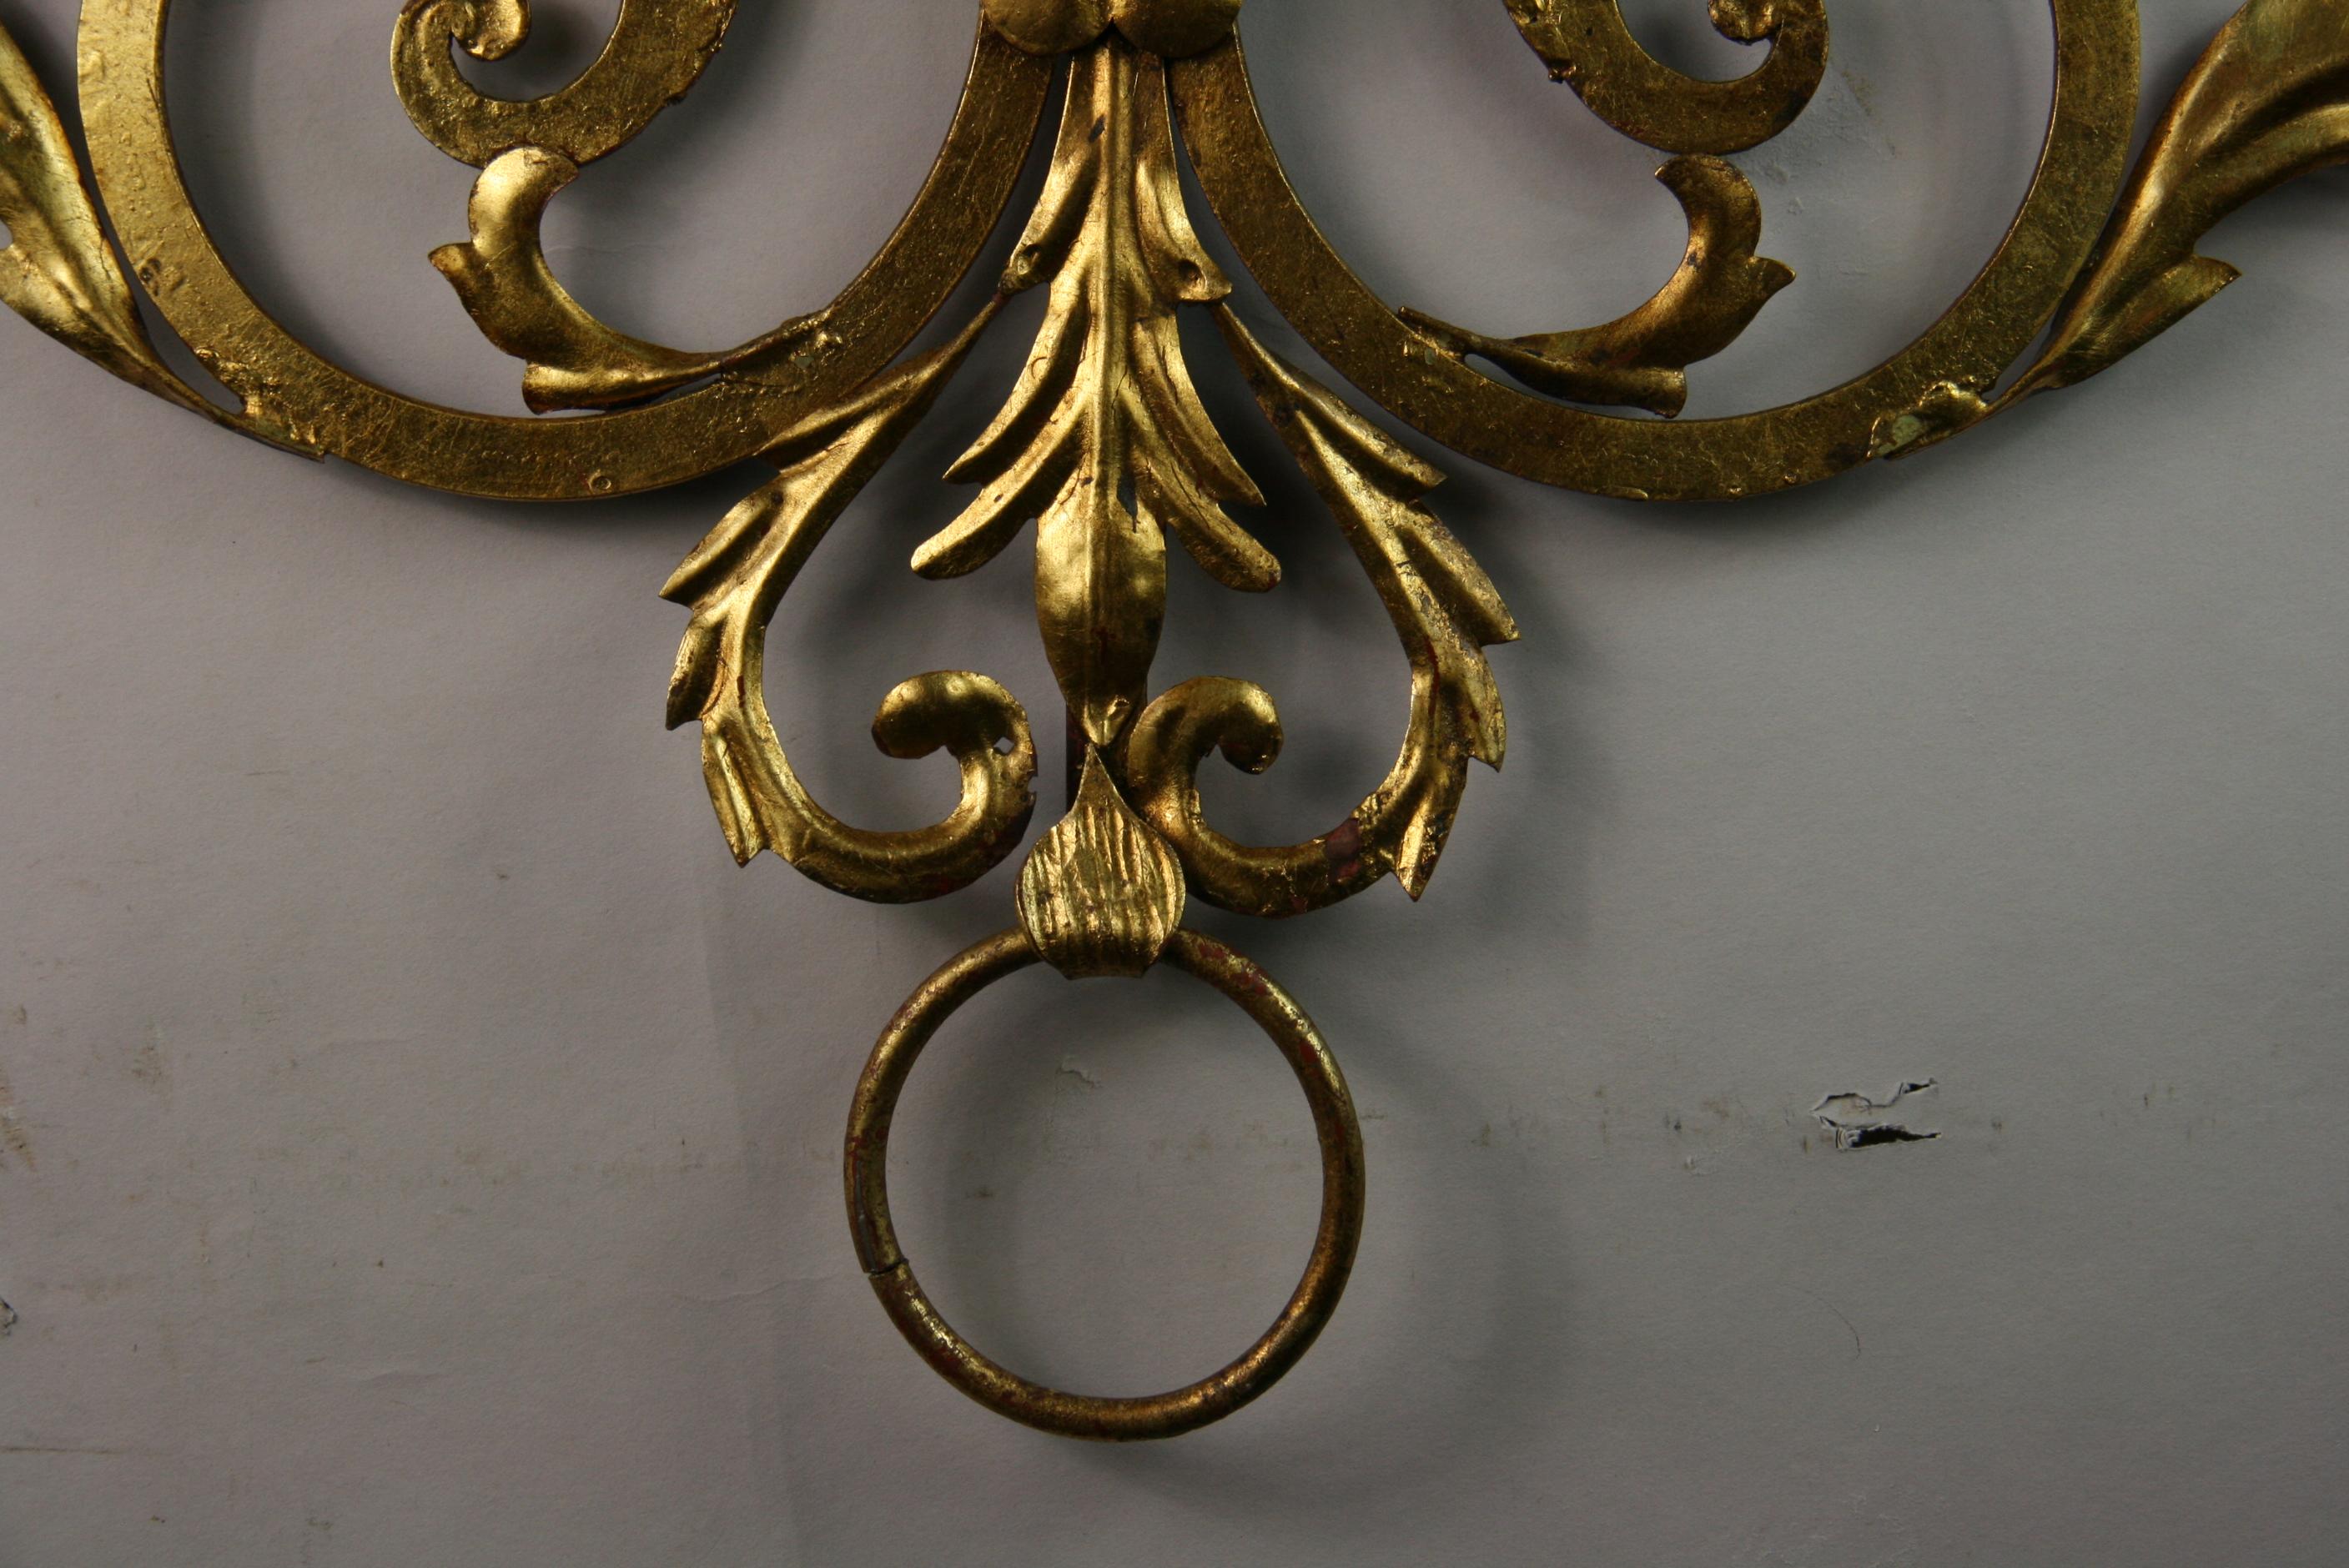 8-157 Italian gilt metal and wood 7-light candle sconce with foil details.
Large size lends itself as an elaborate wall sculpture.